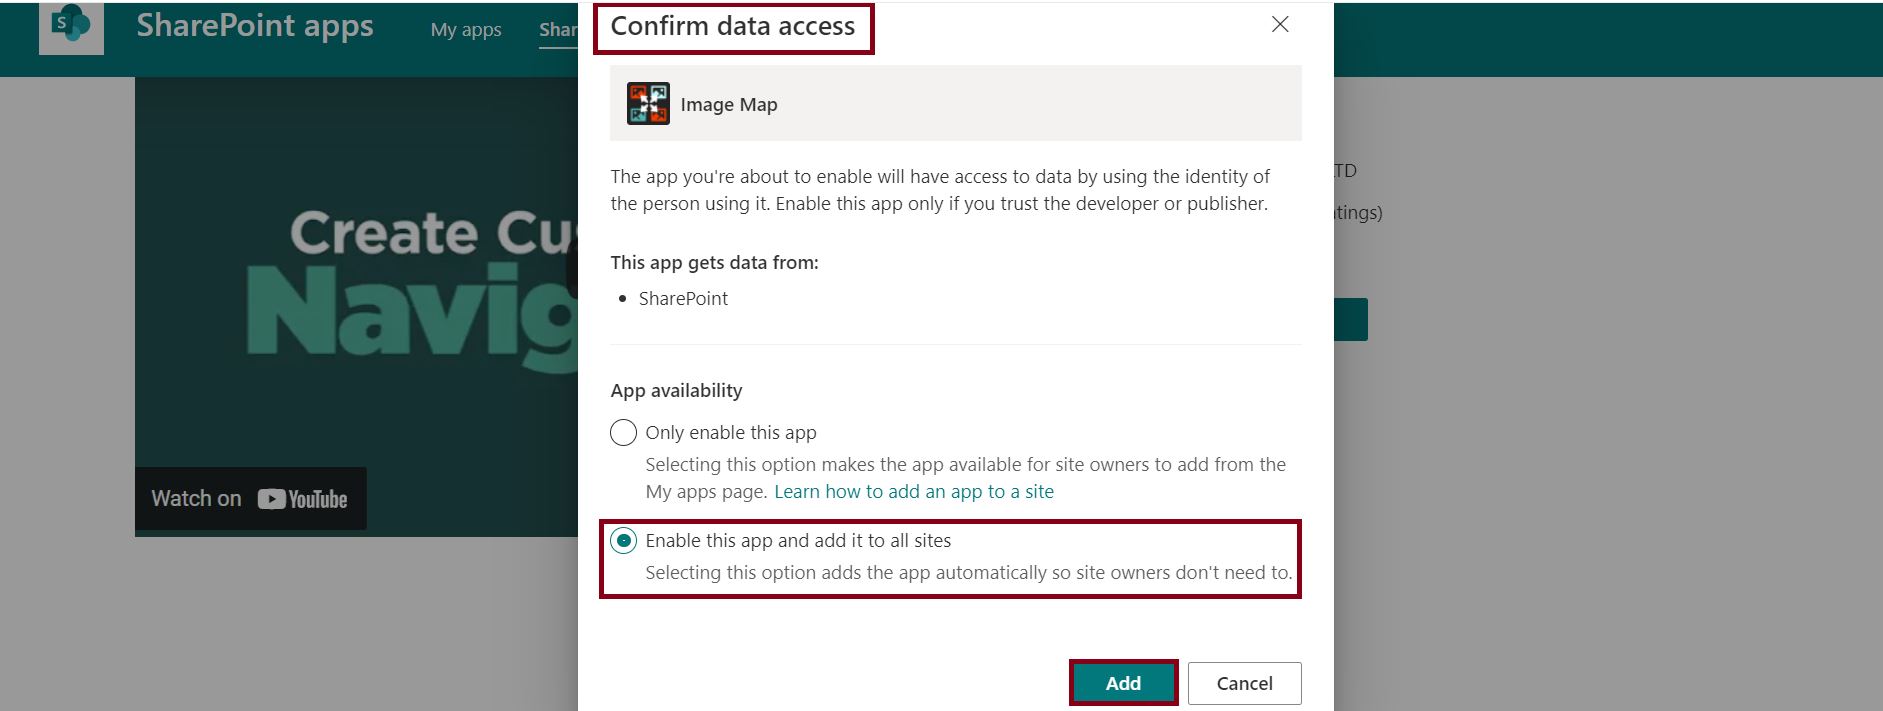 Confirm data access in SharePoint Online Image App